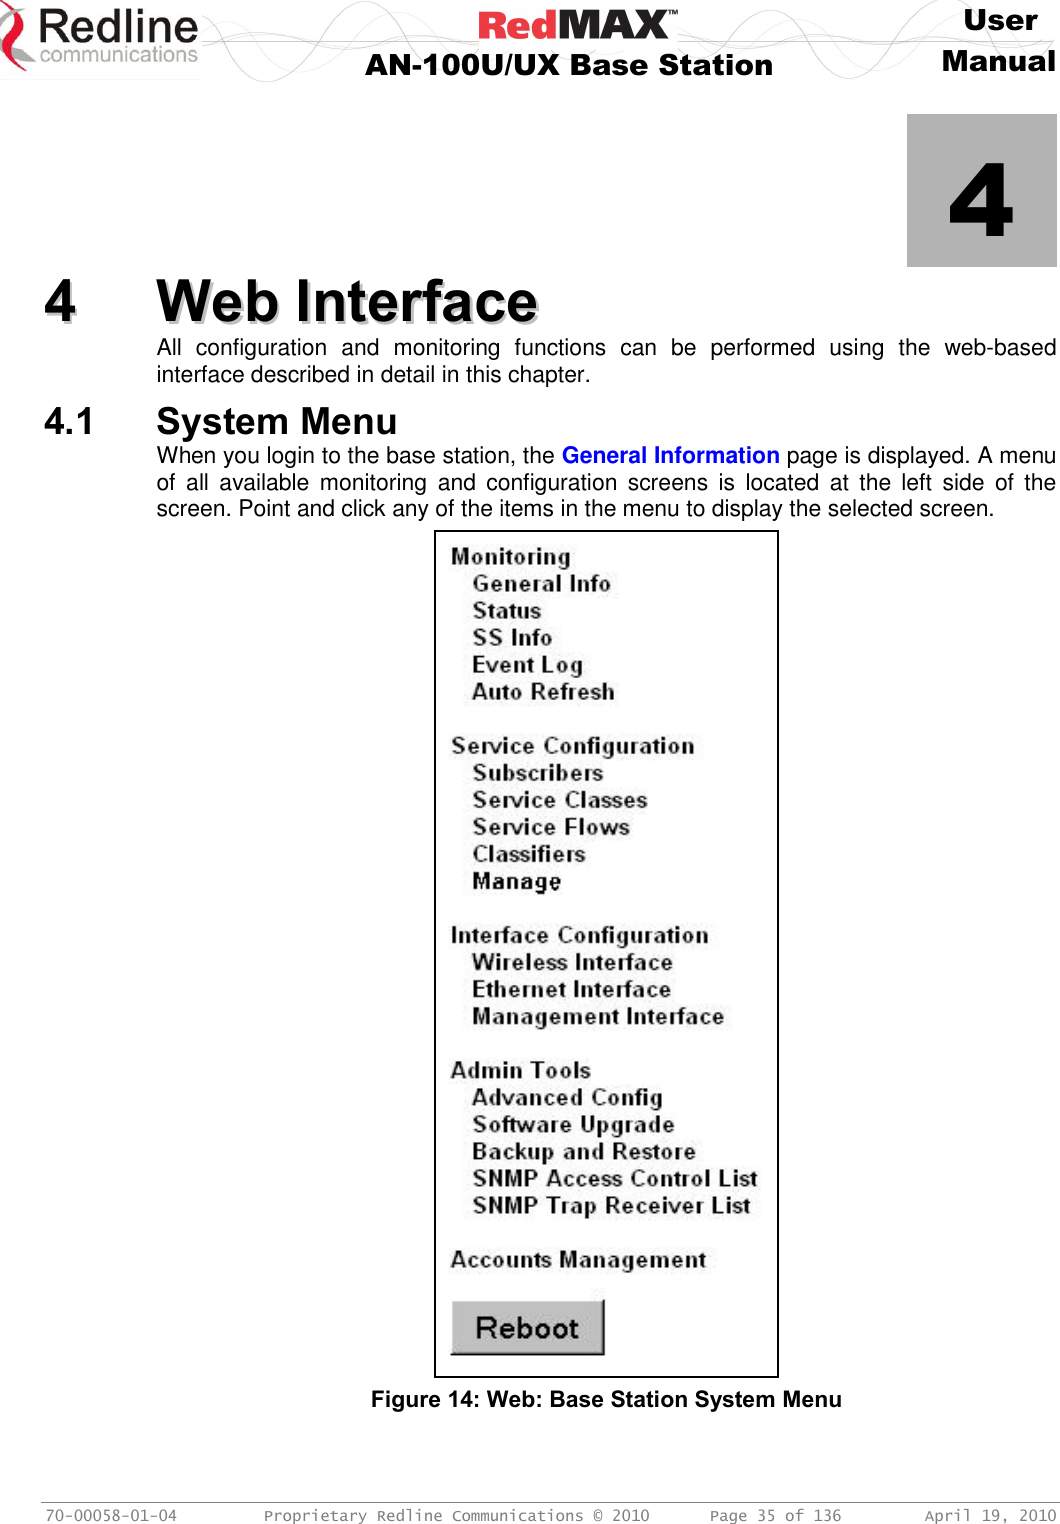     User  AN-100U/UX Base Station Manual   70-00058-01-04  Proprietary Redline Communications © 2010   Page 35 of 136  April 19, 2010            4 44  WWeebb  IInntteerrffaaccee  All  configuration  and  monitoring  functions  can  be  performed  using  the  web-based interface described in detail in this chapter. 4.1 System Menu When you login to the base station, the General Information page is displayed. A menu of  all  available  monitoring  and  configuration  screens  is  located  at  the  left  side  of  the screen. Point and click any of the items in the menu to display the selected screen.  Figure 14: Web: Base Station System Menu 